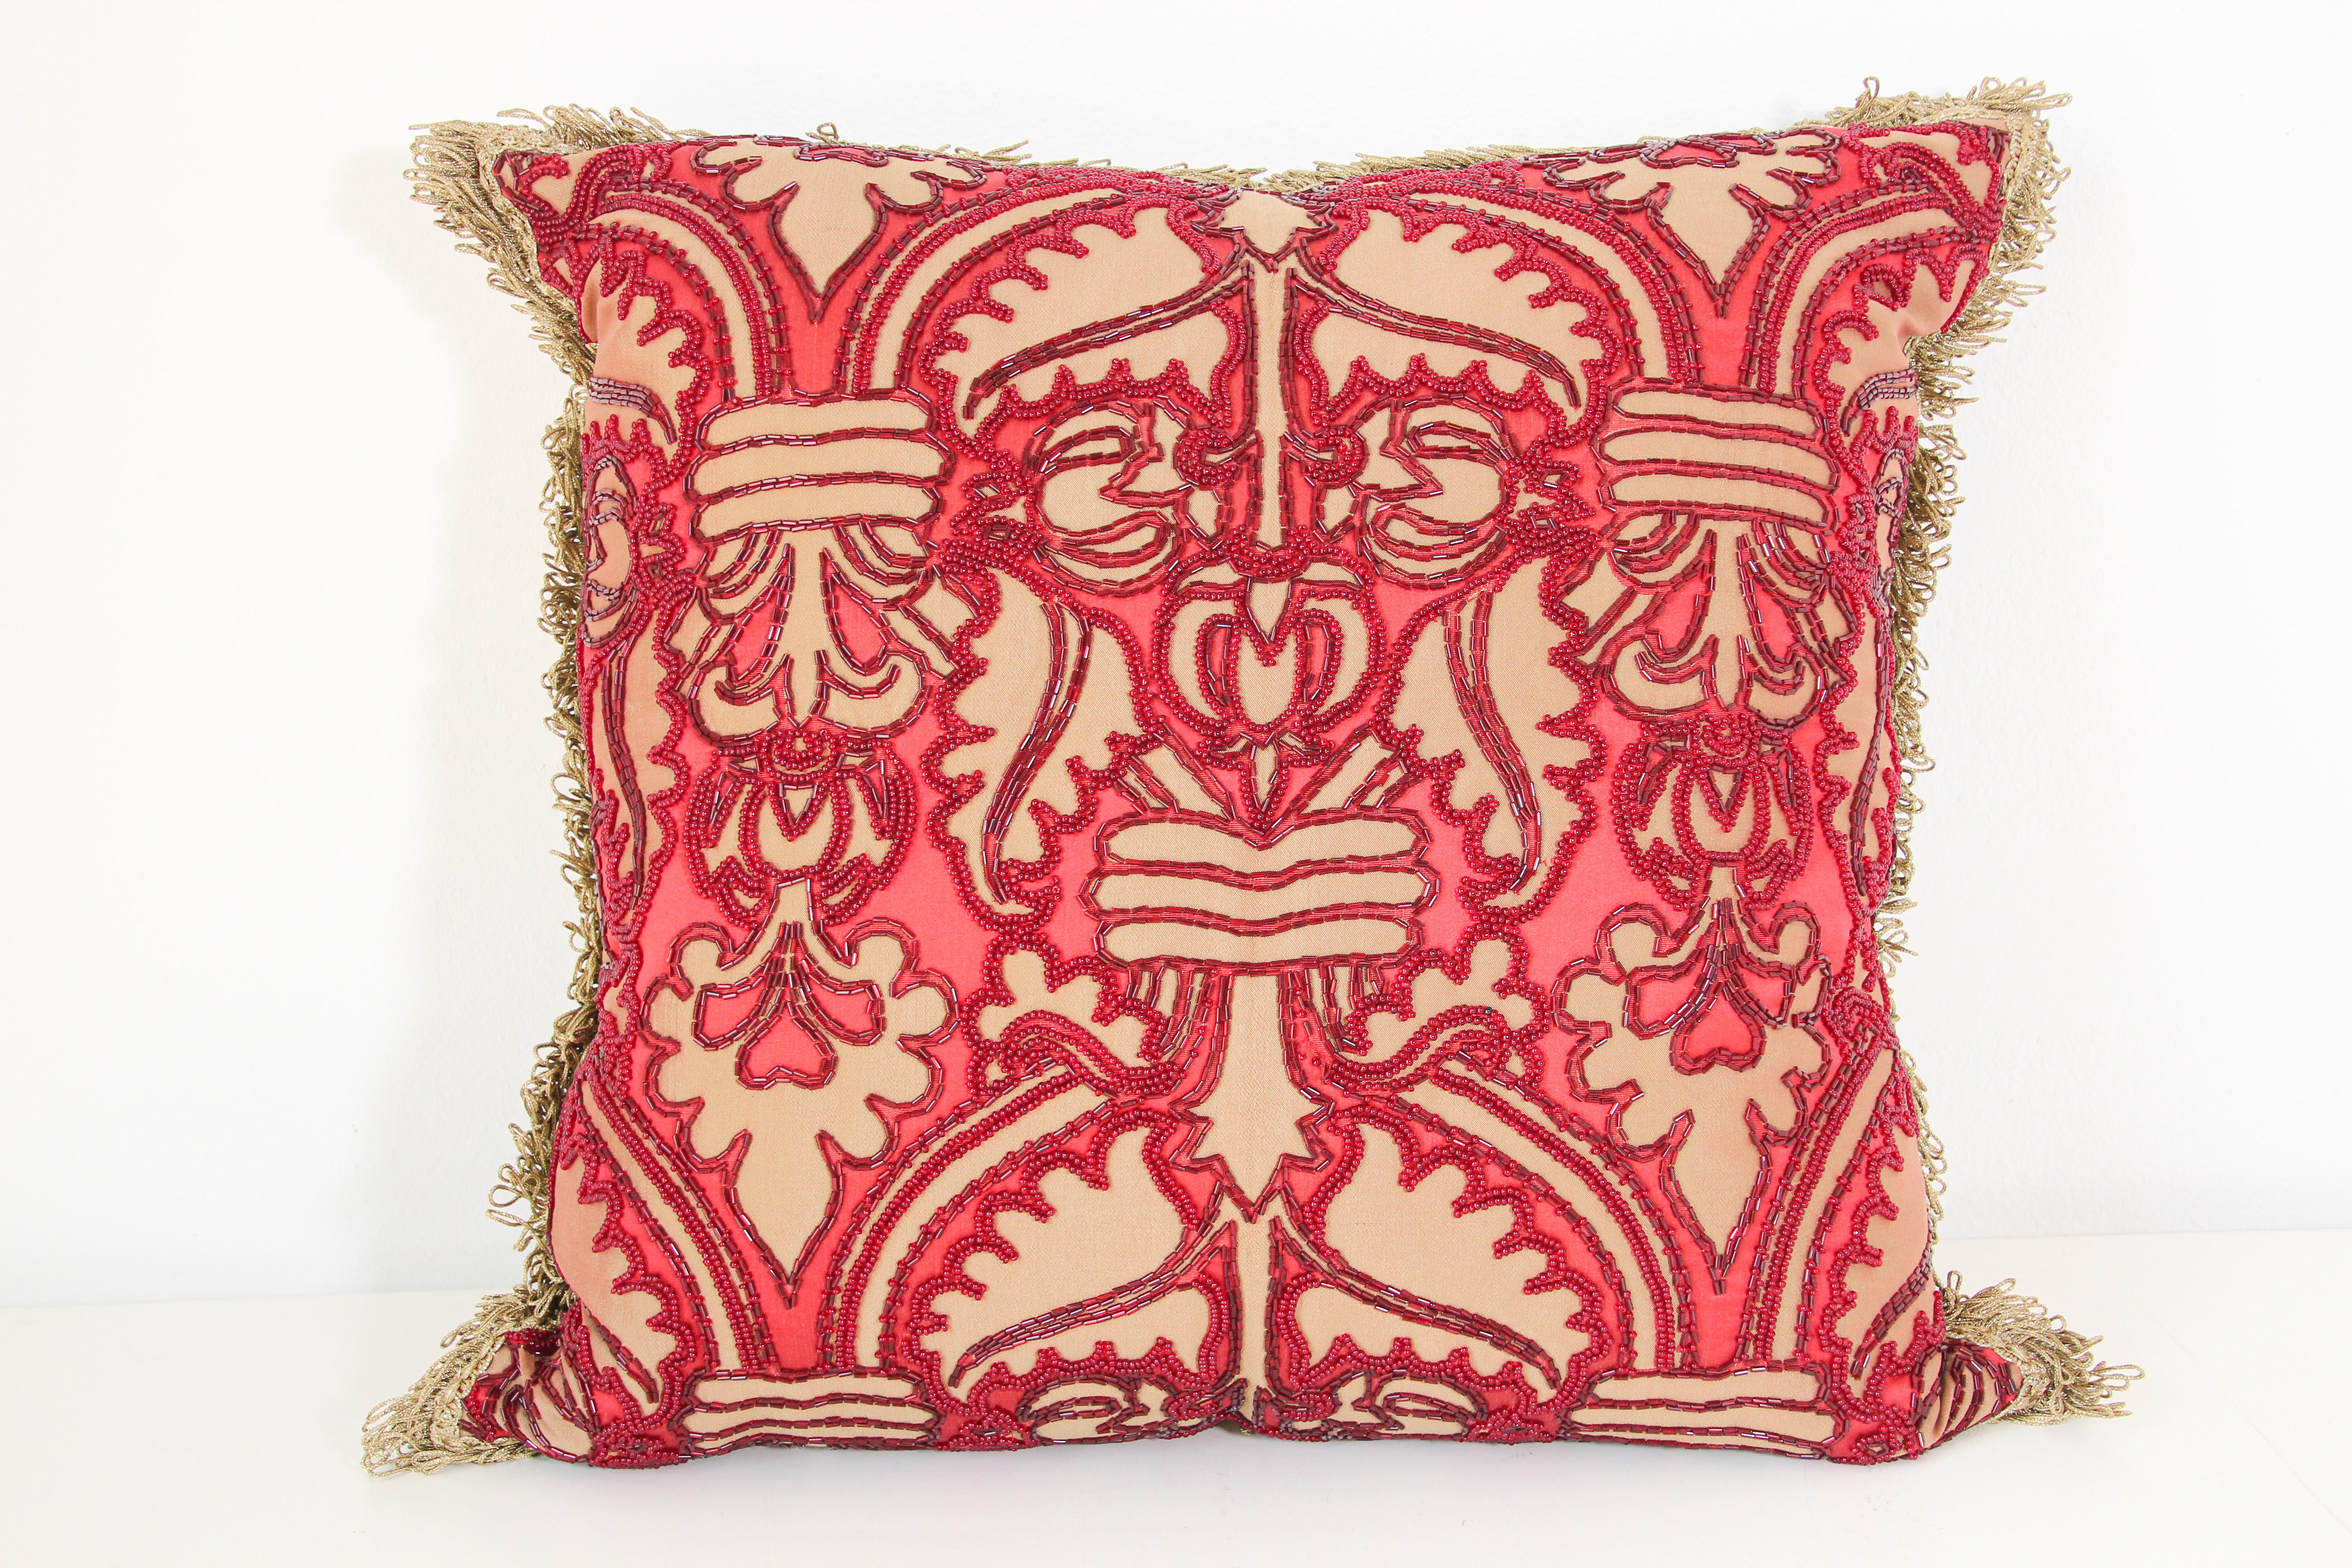 Large handmade silk pillows with metallic threads and embroidered with rich metallic and red beads.
Goose down-and-feather inserts filled and only a pair available, custom made.
Handcrafted by Morison and Company, one of a kind numbered.
2